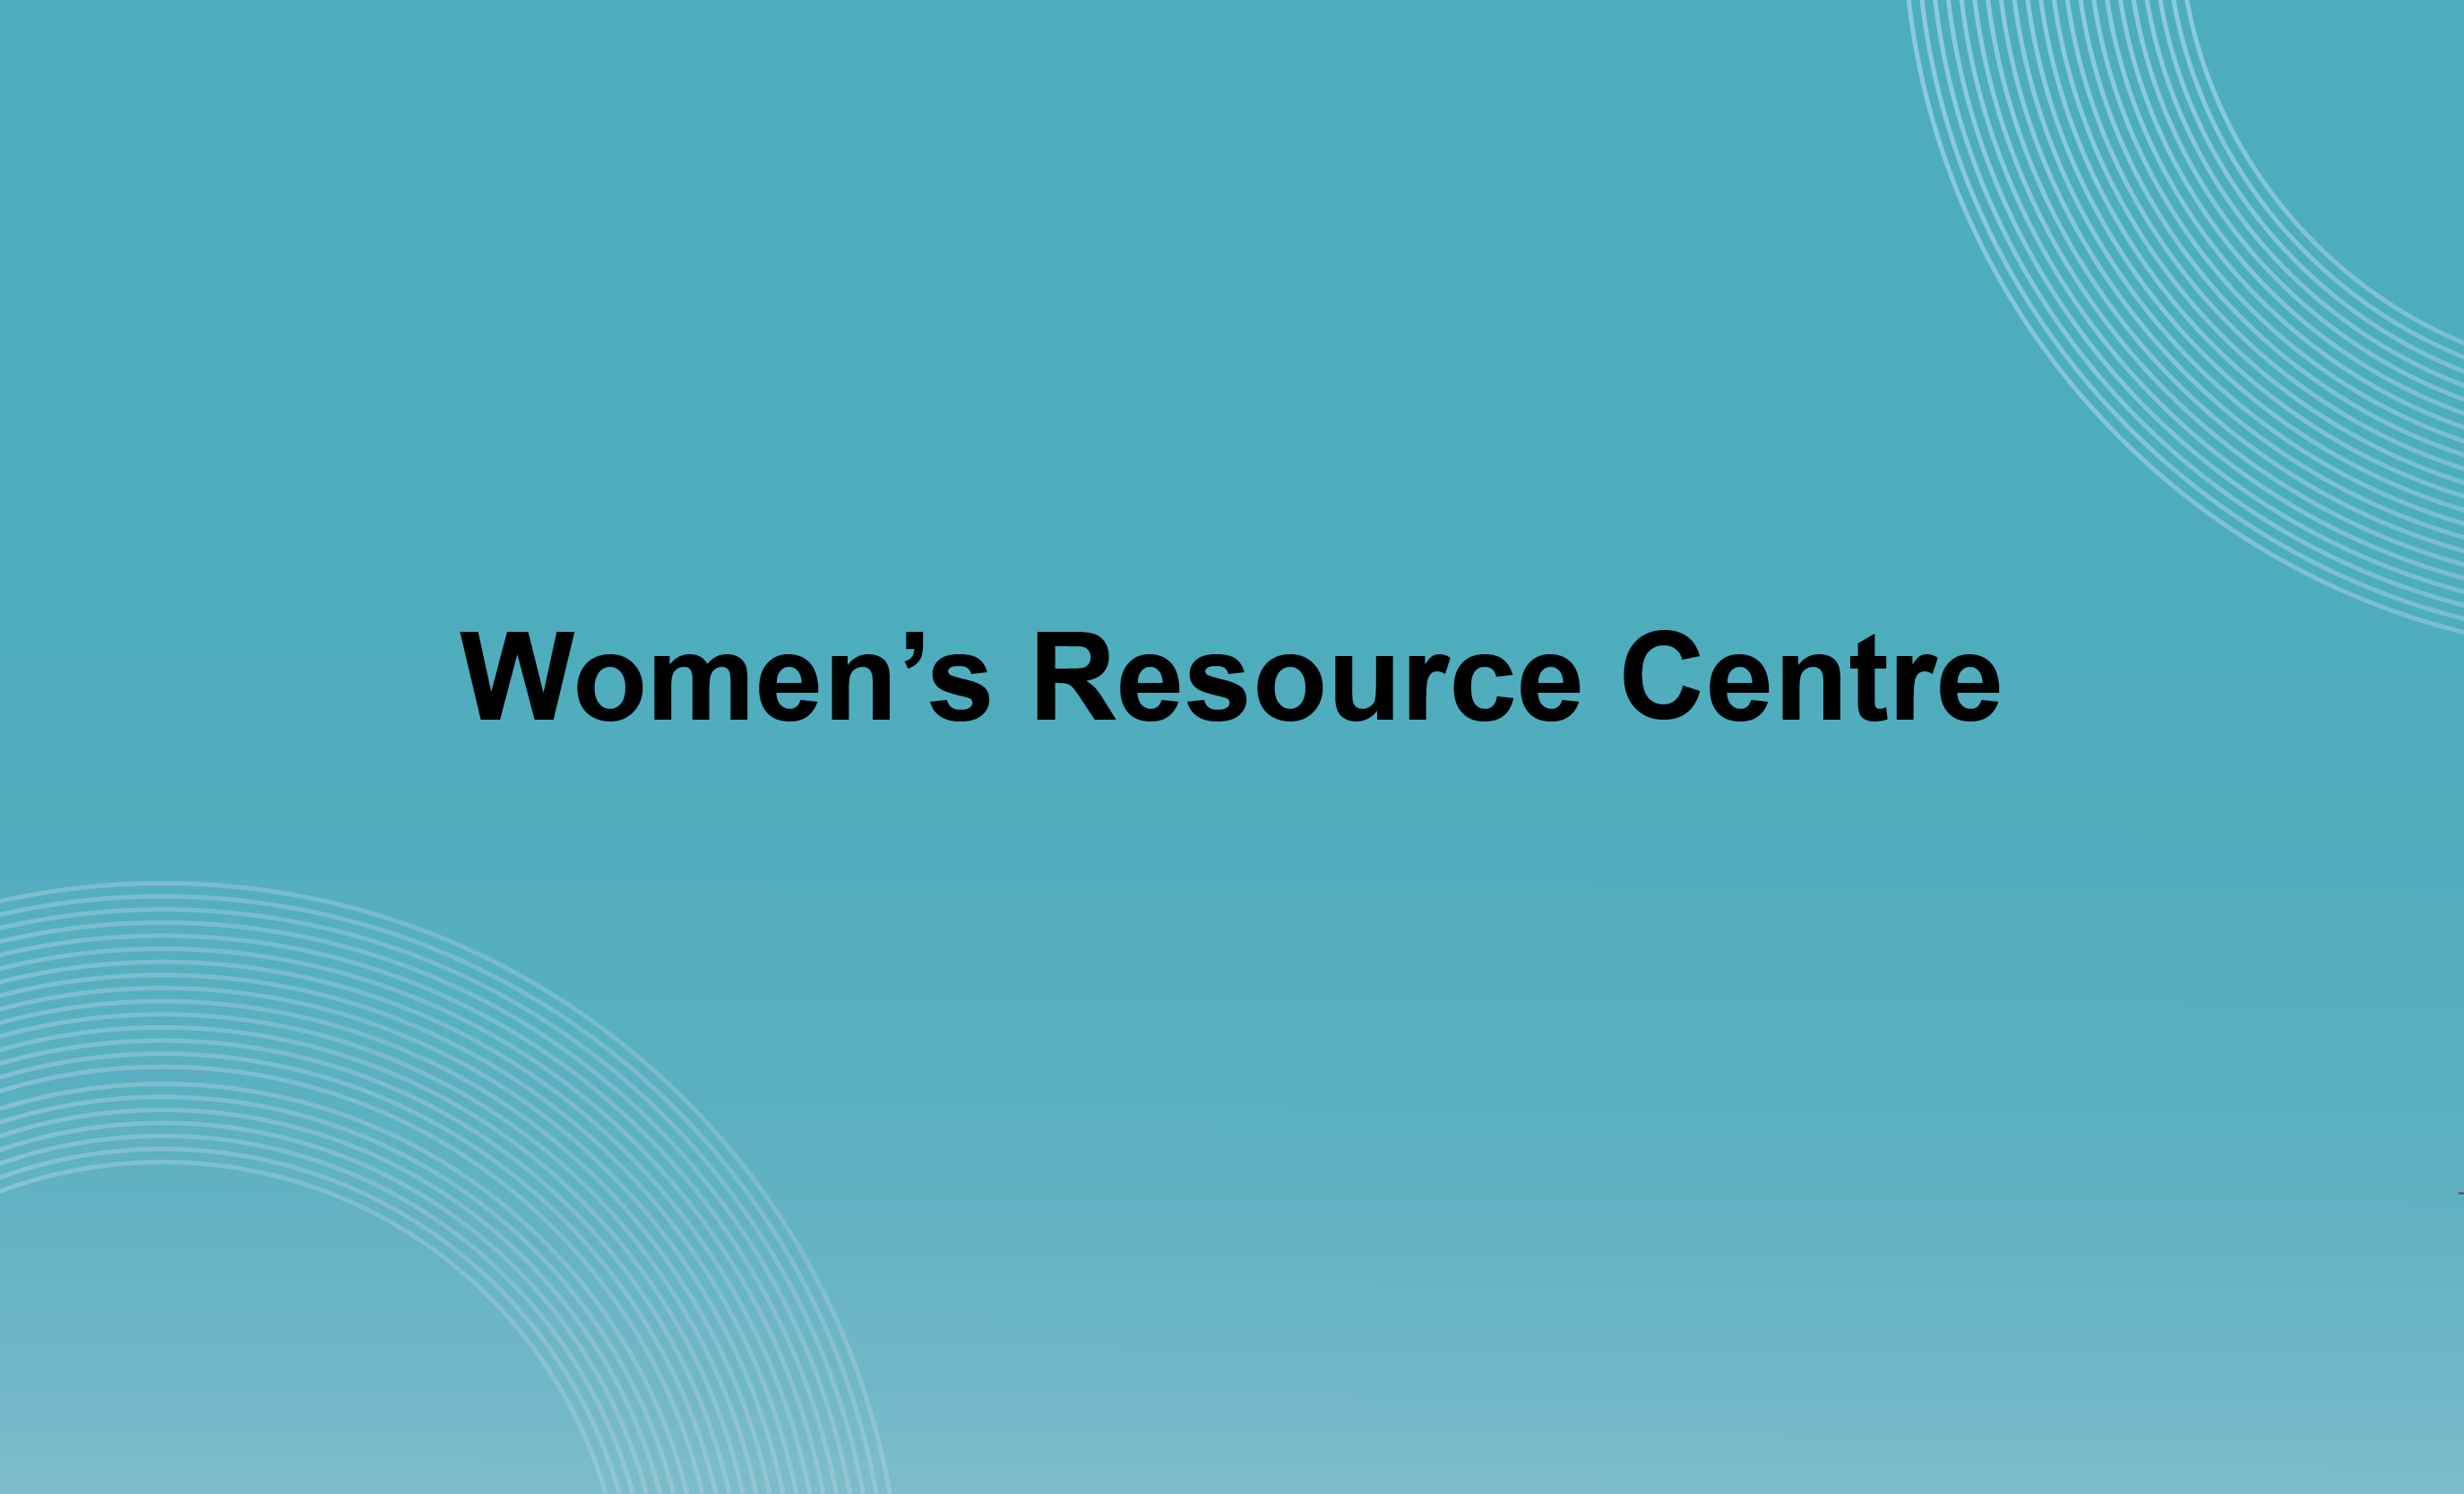 Welcoming the new Women’s Resource Centre